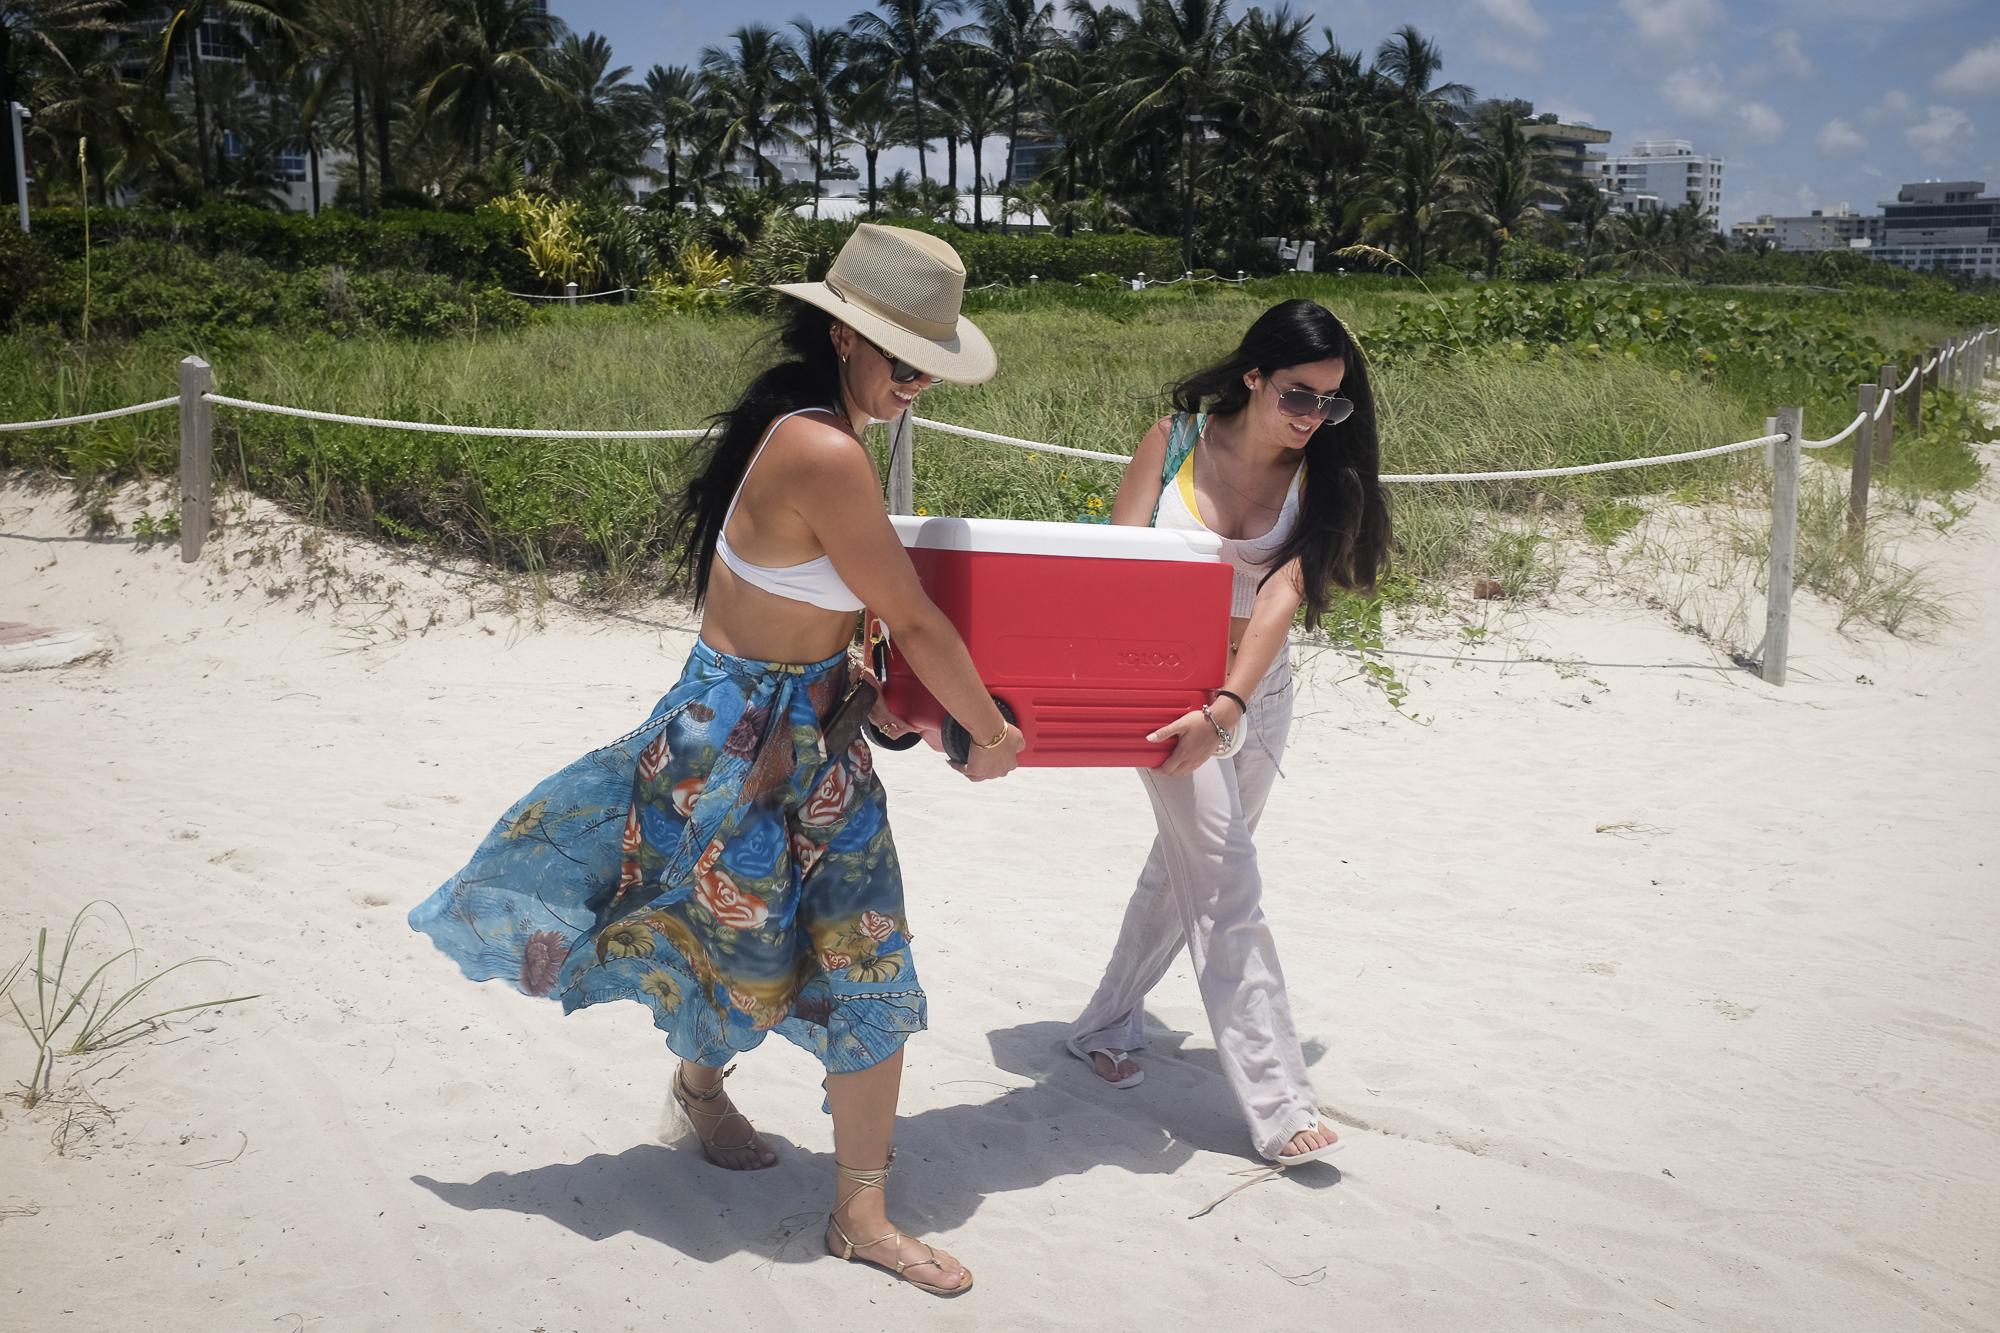 Beaches reopen with restrictions to limit the spread of the coronavirus disease  - Women arrive to the beach while carrying a cooler as...